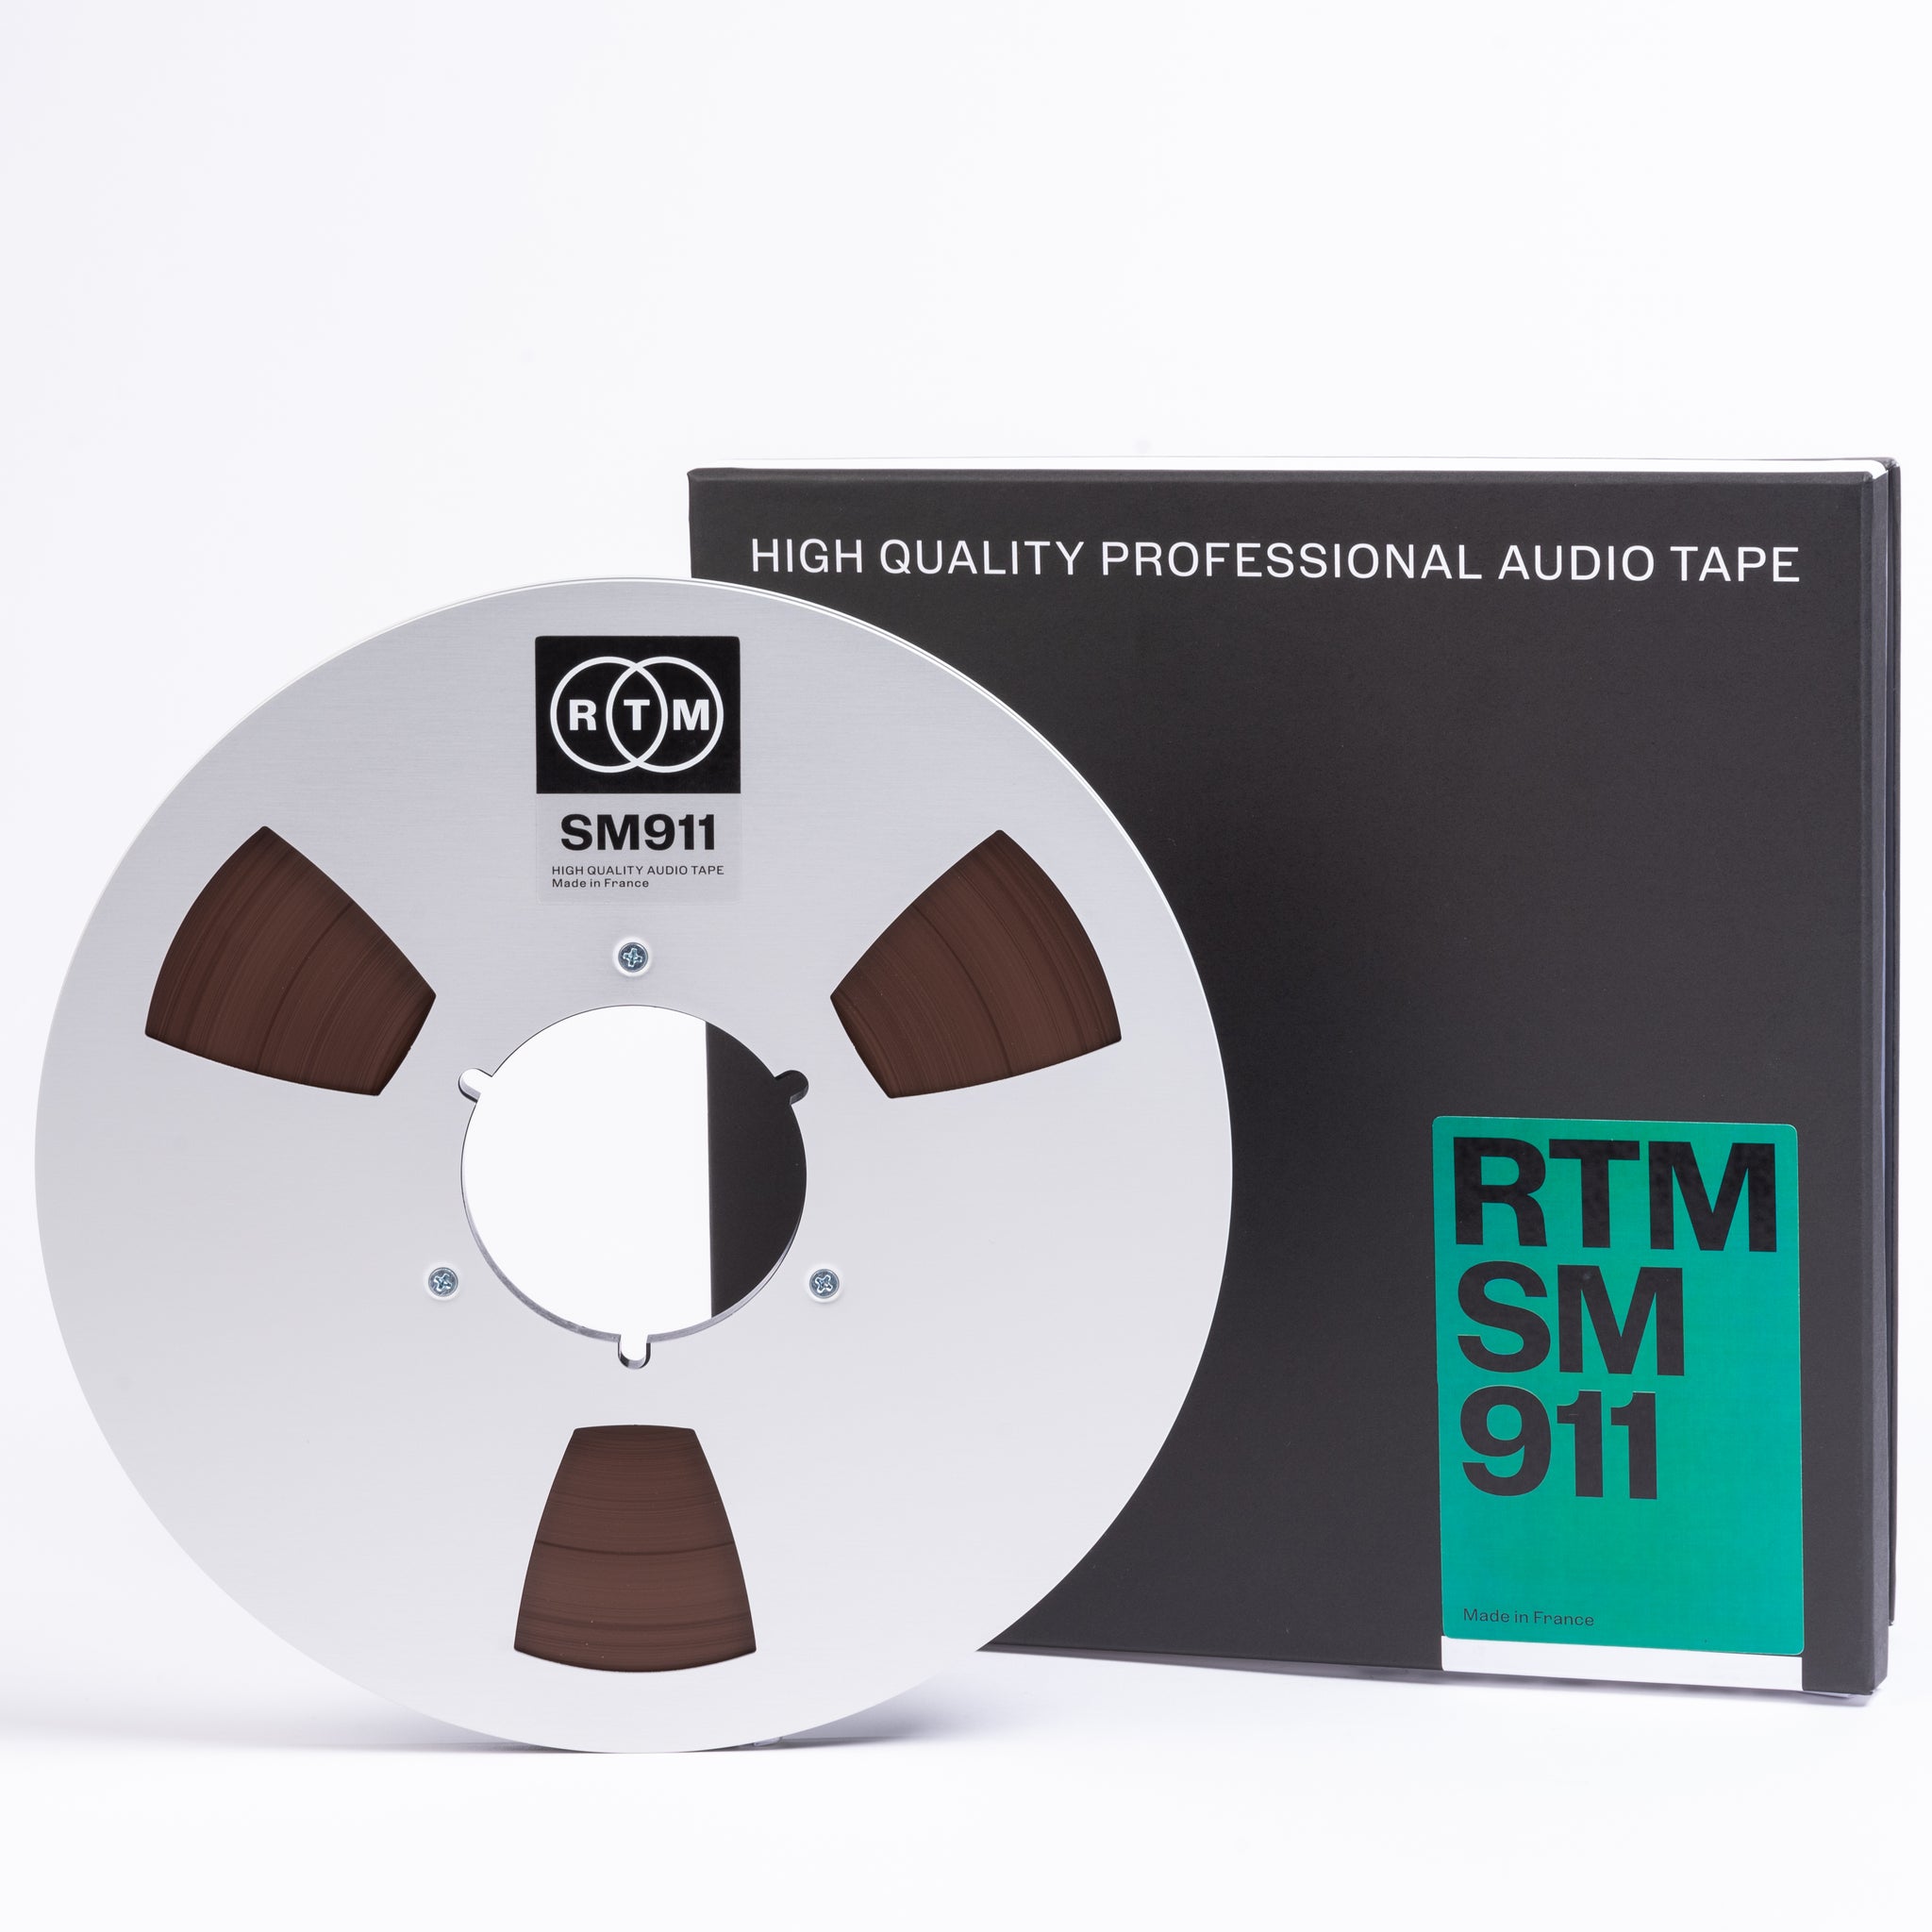 Empty reel tape boxes - professional reel tape accessories